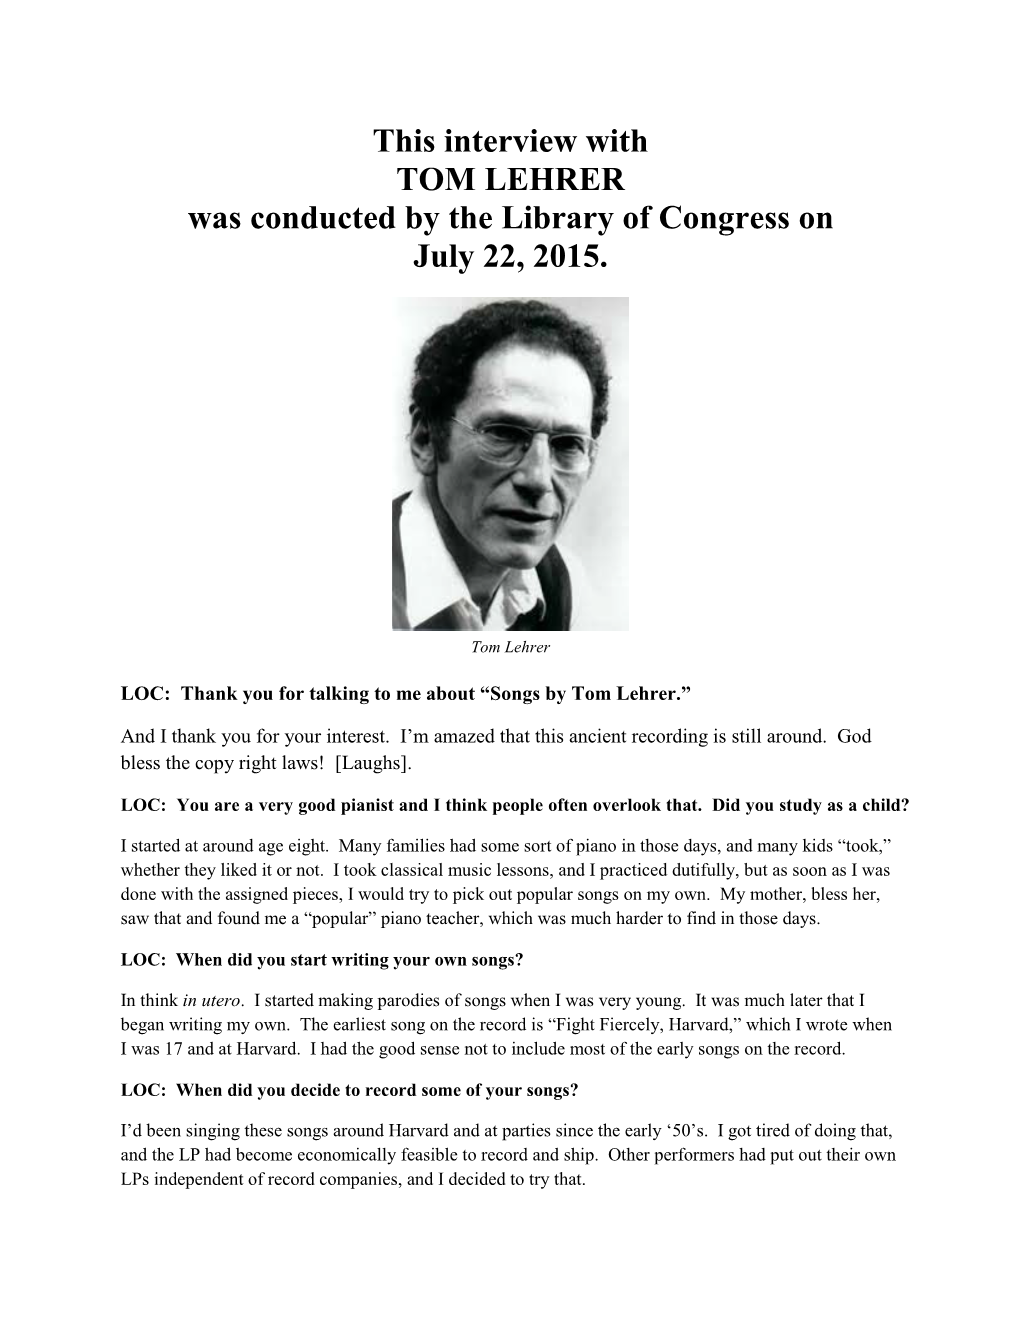 Interview with TOM LEHRER Was Conducted by the Library of Congress on July 22, 2015